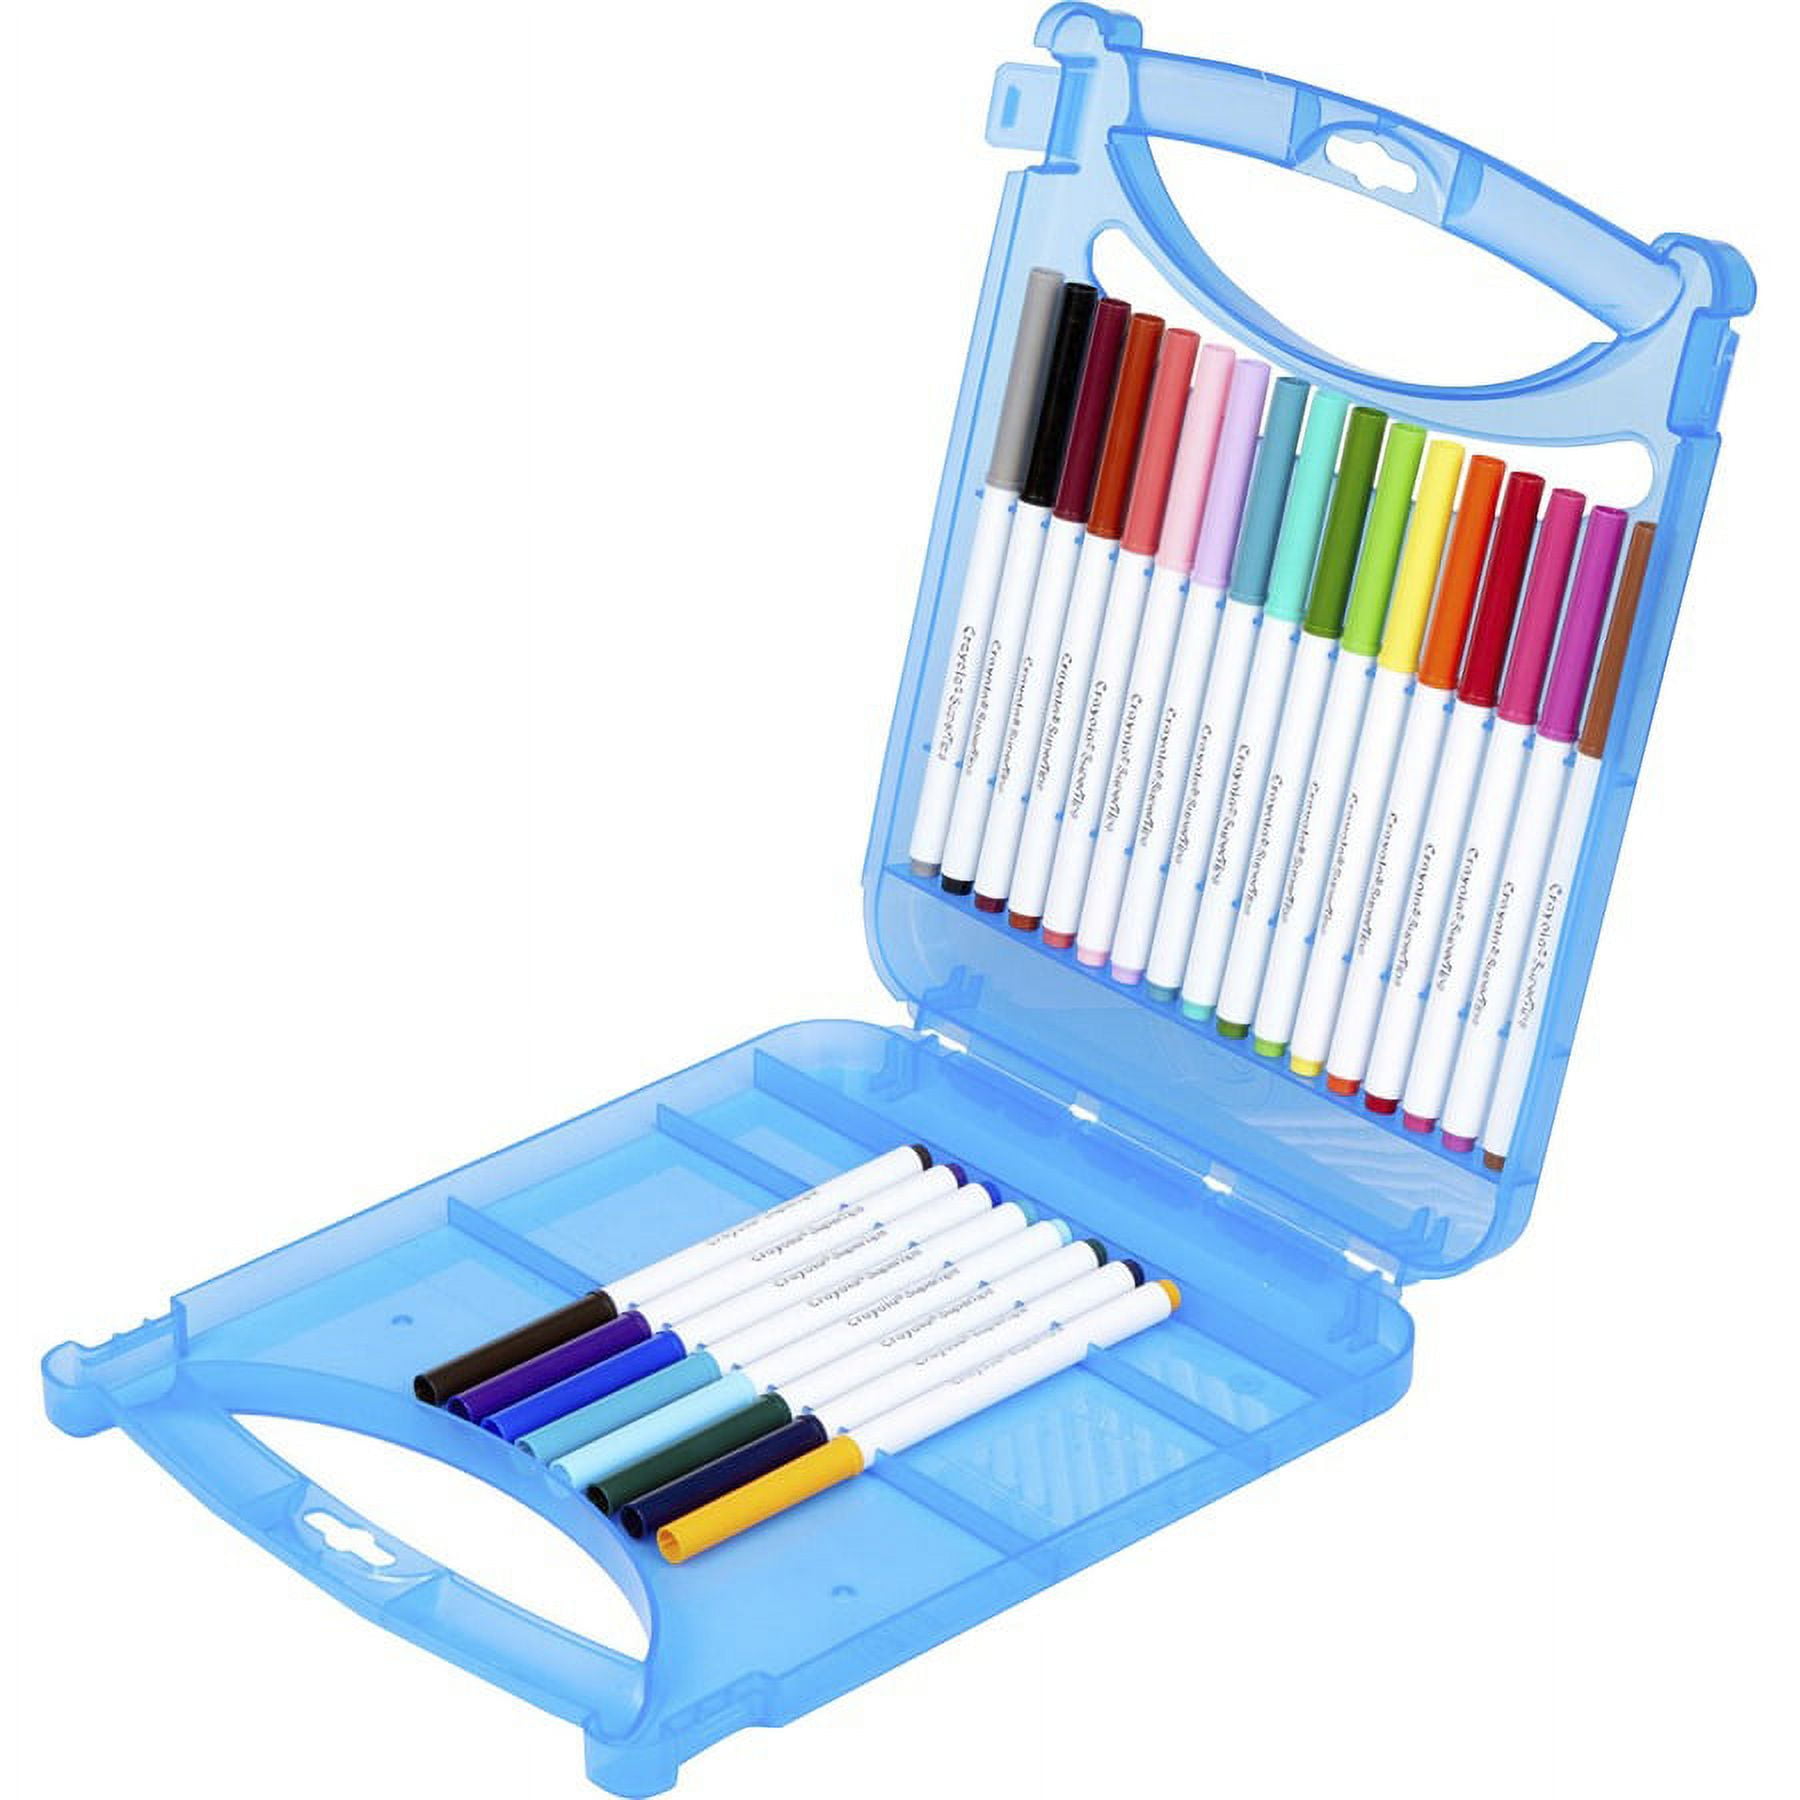 Crayola Super Tips Art Kit - Classroom, Home, Art - Recommended For 4 Year  - 65 Piece(s) - 1.25Height x 9.25Width x 11.30Length - 1 / Kit 